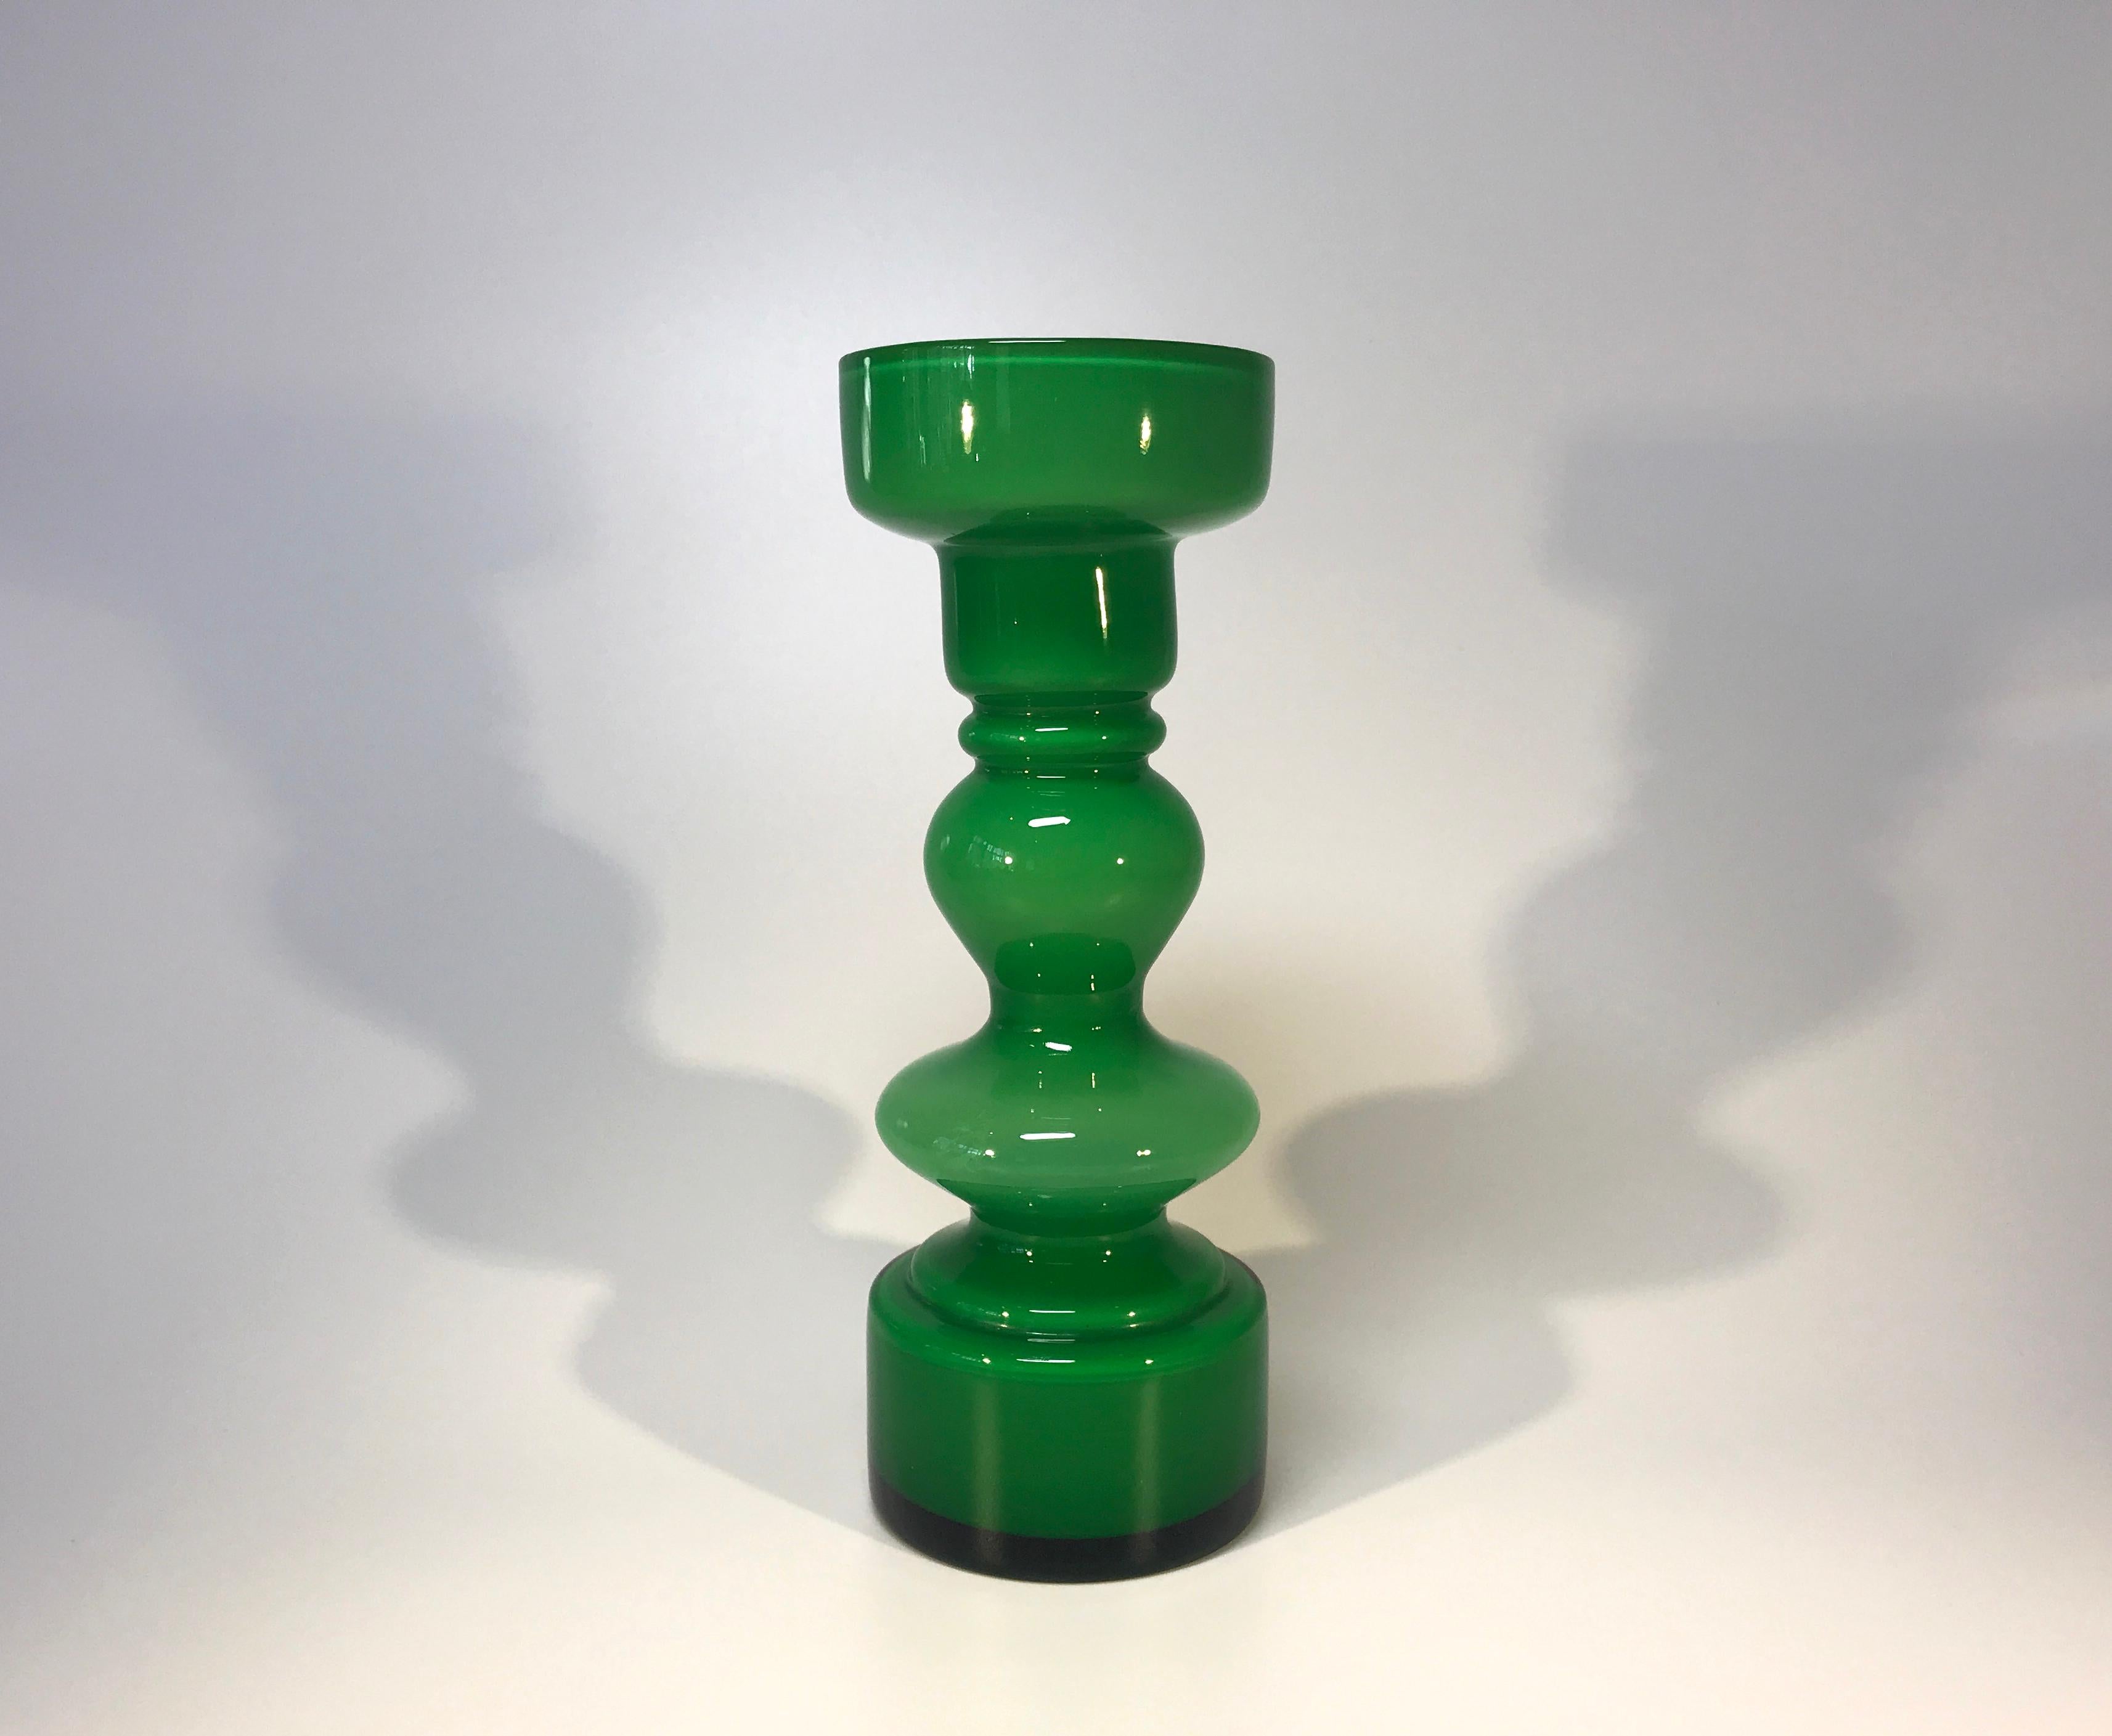 Swedish emerald green with white cased interior glass vase, attributed to Lindshammar
Classic Scandinavian hooped design - so iconic of mid-20th century style
circa 1960s-1970s
Measures: Height 7 inch, diameter 2.5 inch
In excellent condition
Wear